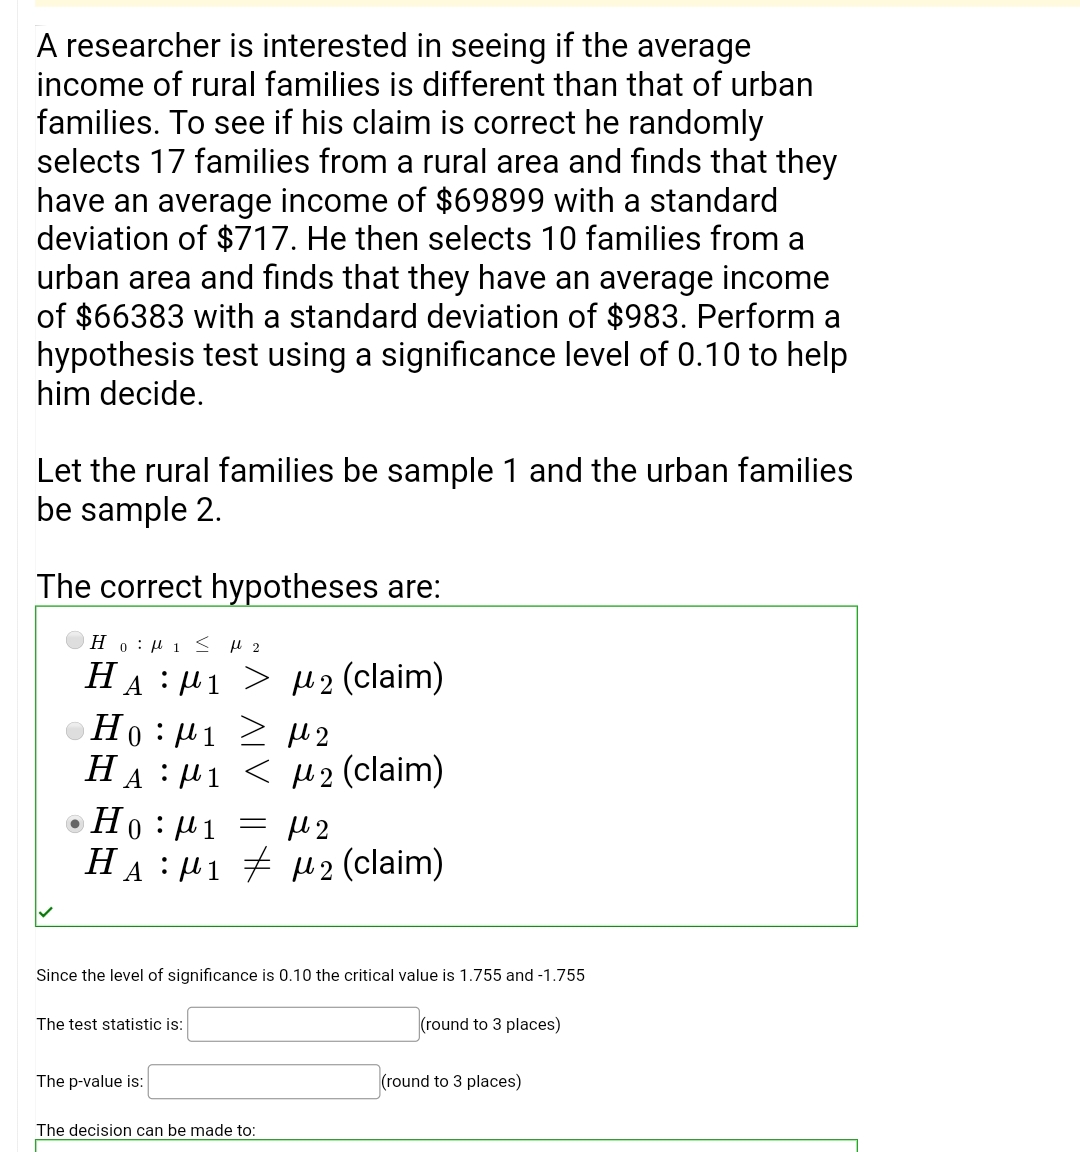 A researcher is interested in seeing if the average
income of rural families is different than that of urban
families. To see if his claim is correct he randomly
selects 17 families from a rural area and finds that they
have an average income of $69899 with a standard
deviation of $717. He then selects 10 families from a
urban area and finds that they have an average income
of $66383 with a standard deviation of $983. Perform a
hypothesis test using a significance level of 0.10 to help
him decide.
